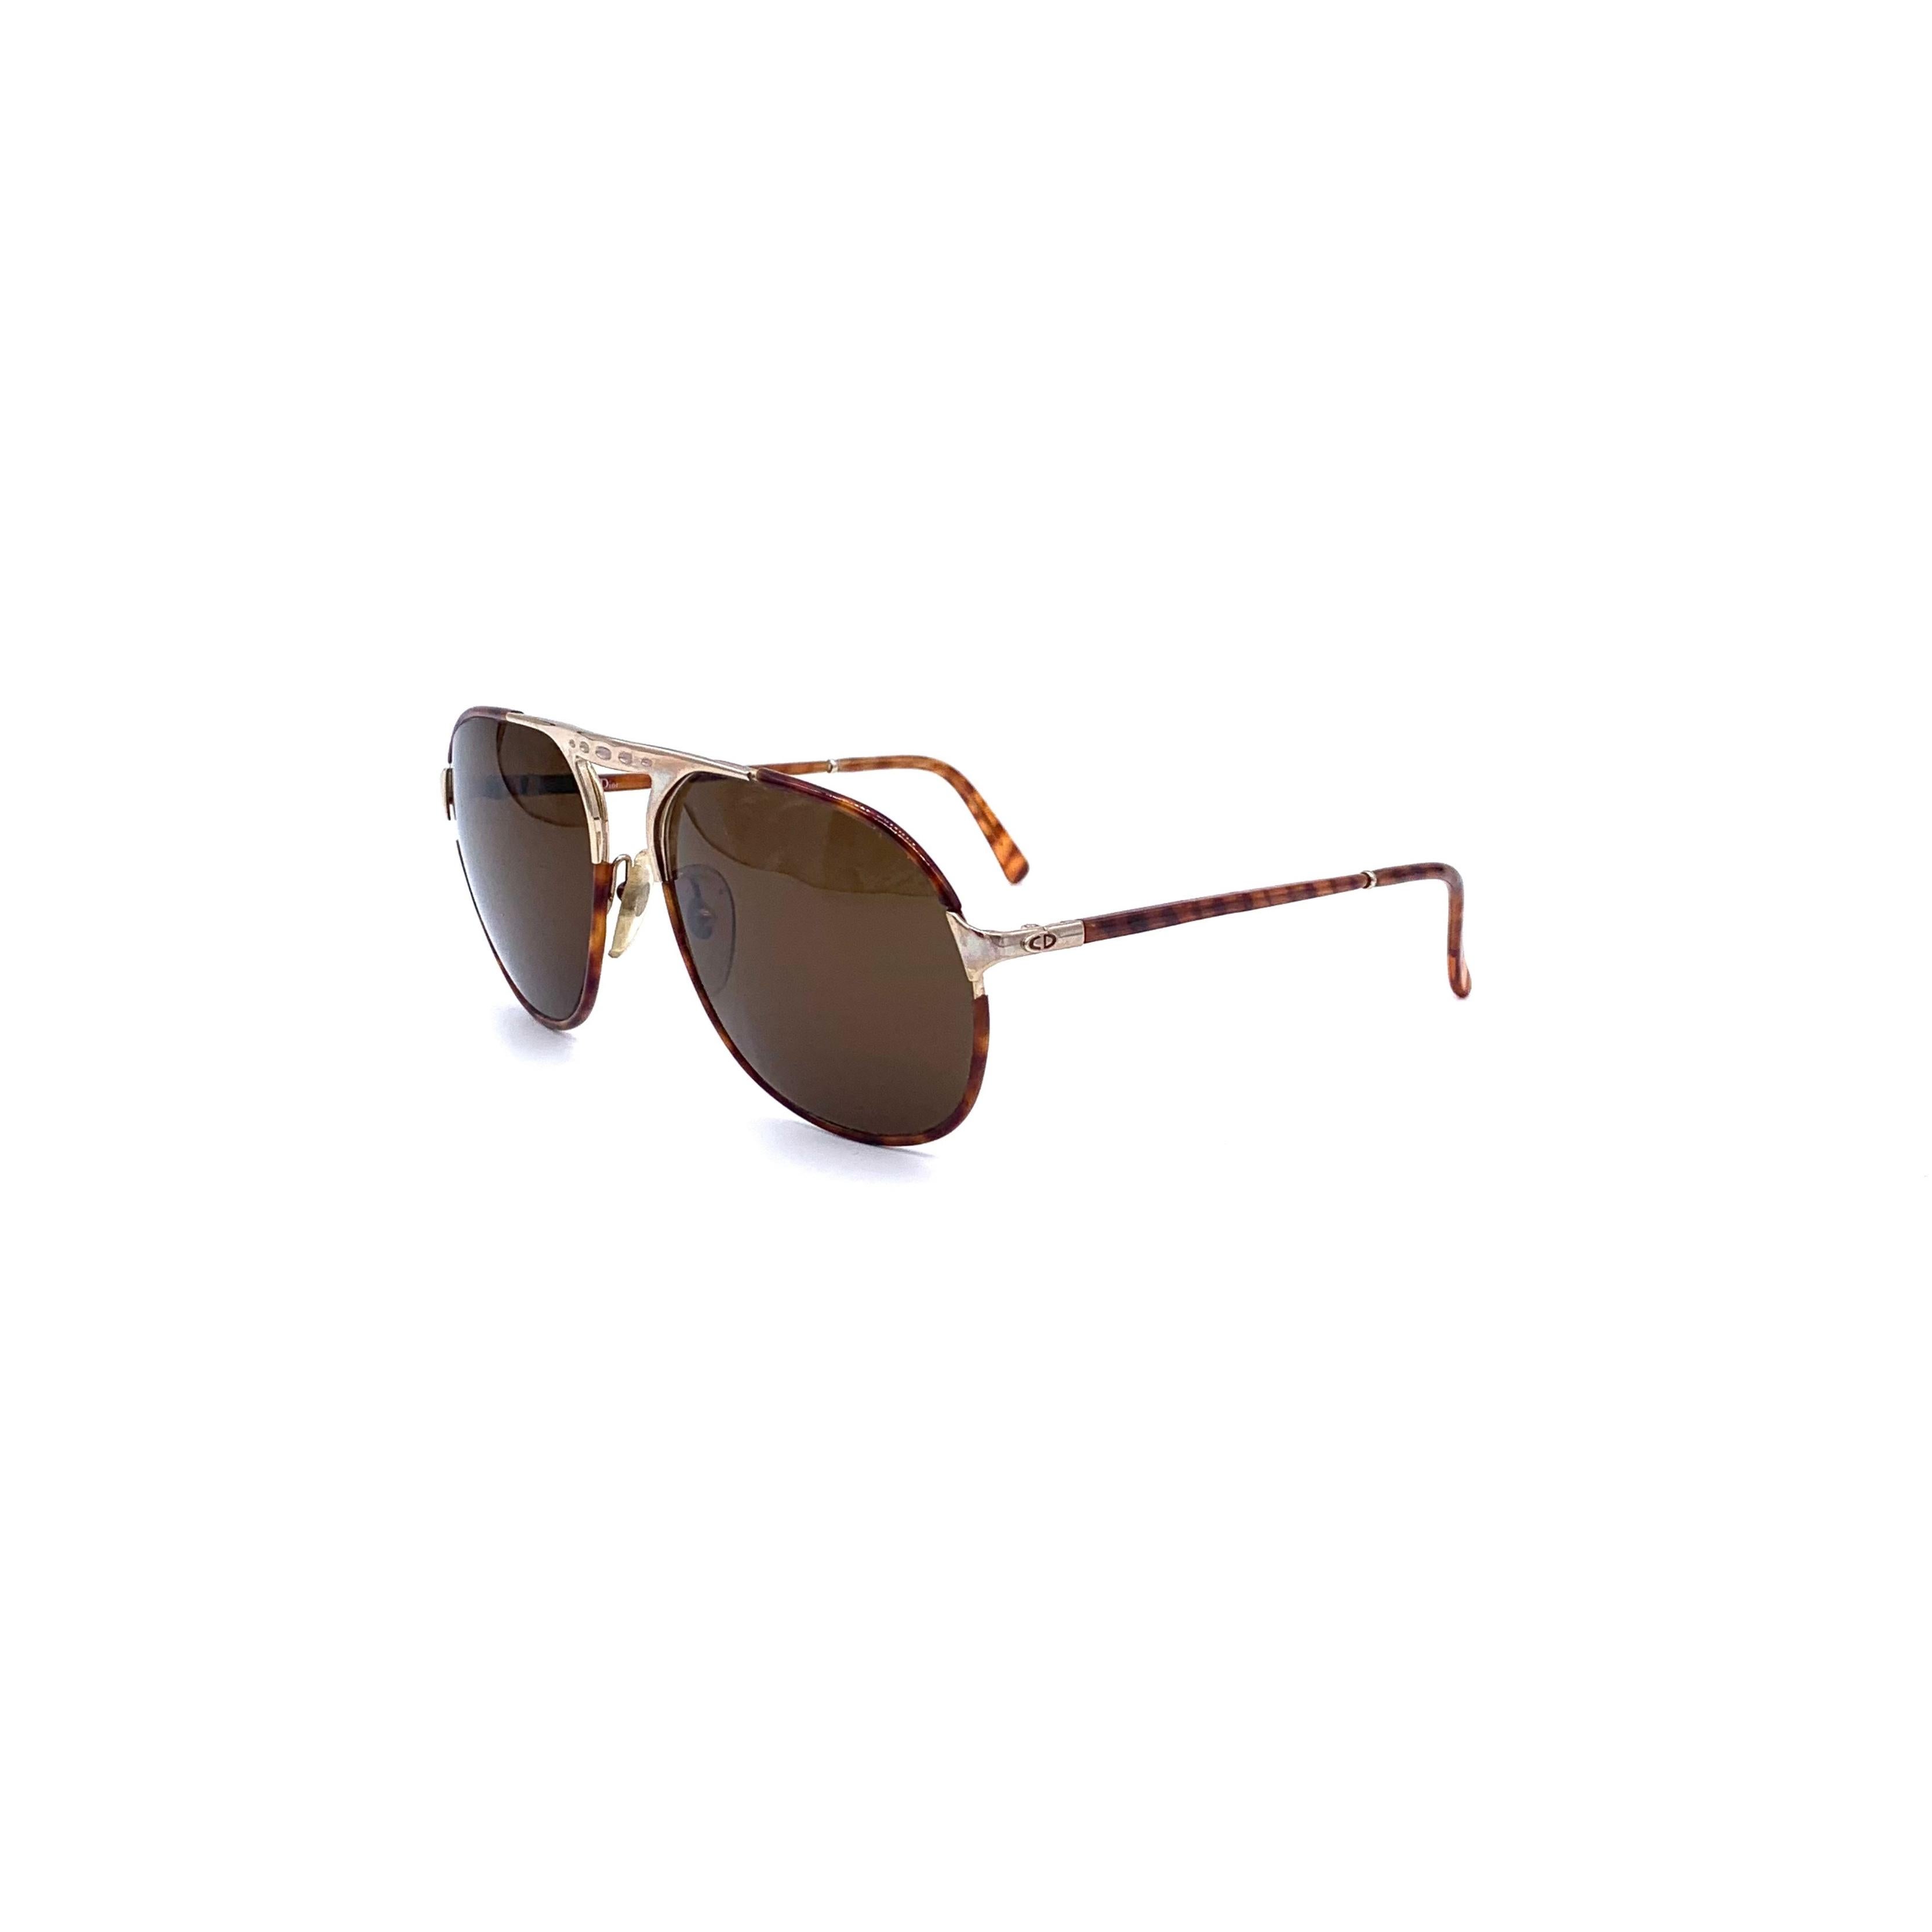 Experience the retro style of Dior Aviator Sunglasses. Featuring a classic aviator silhouette with brown lenses, a tortoiseshell effect acetate frame, and a golden metal bridge, these sunglasses are ideal for achieving a vintage look.